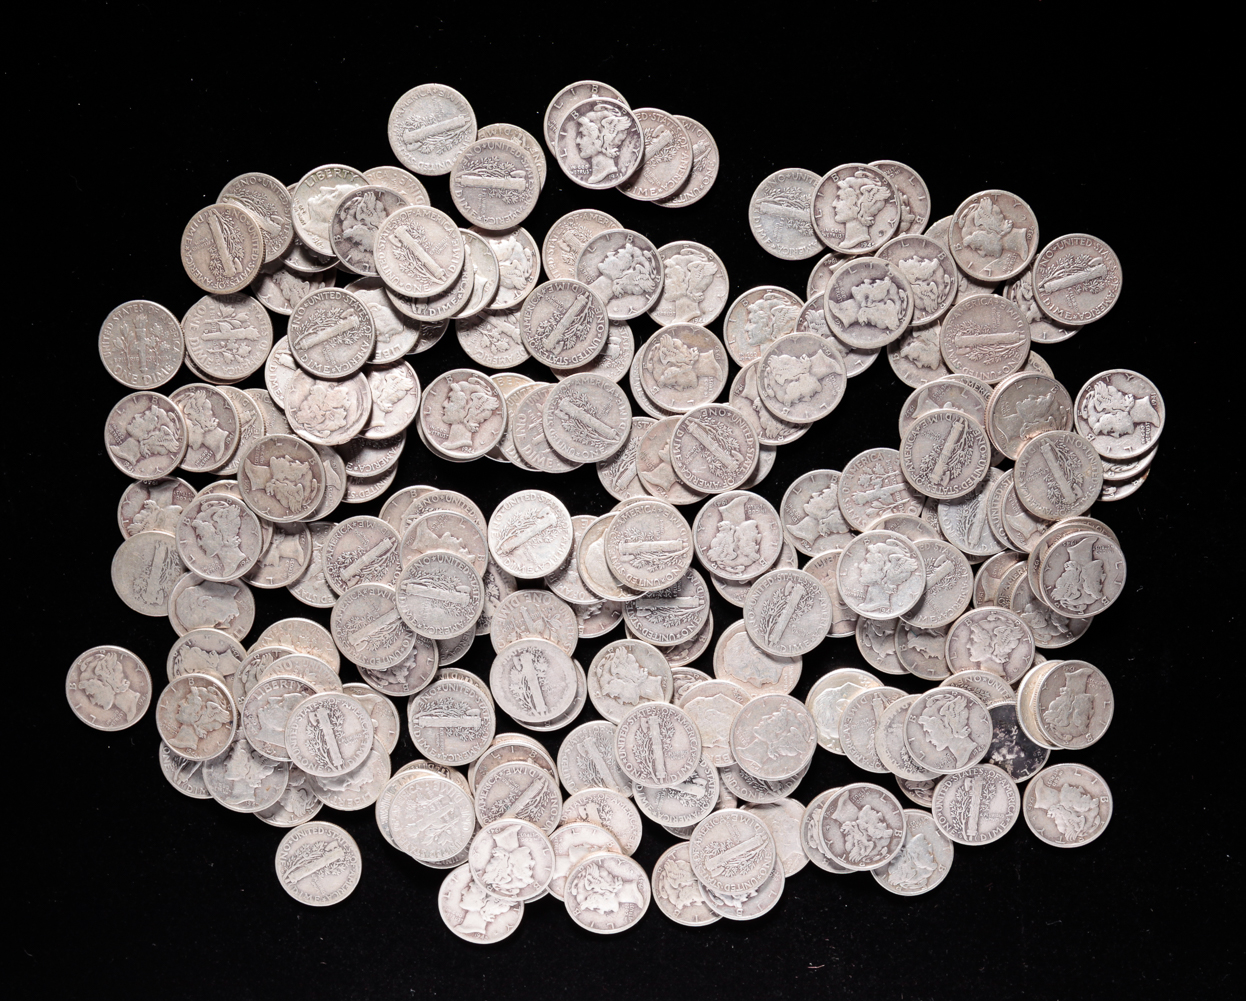 GROUP OF 200 UNSORTED SILVER DIMES 31a1dc